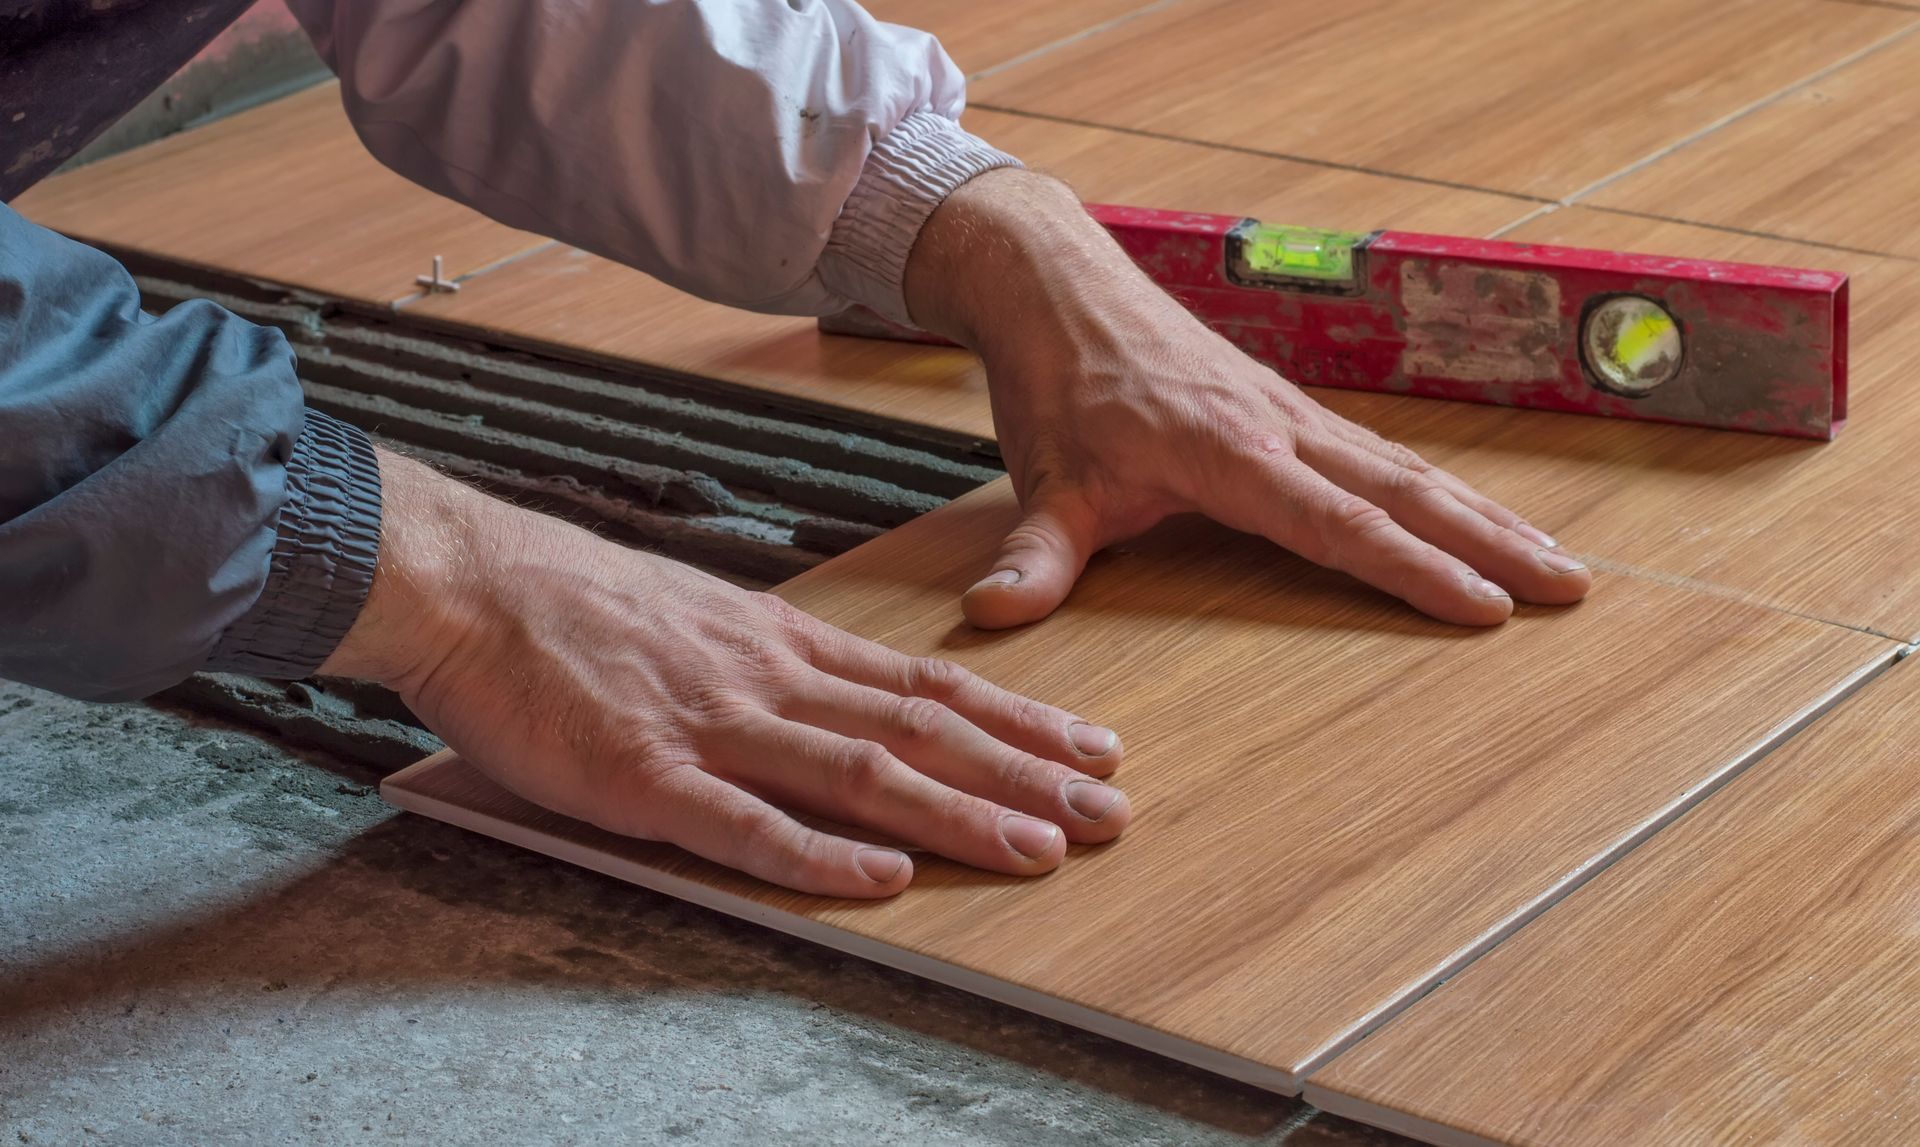 An experienced handyman skillfully repairing and installing tiles, carefully aligning and leveling each piece to create a seamless and attractive surface.